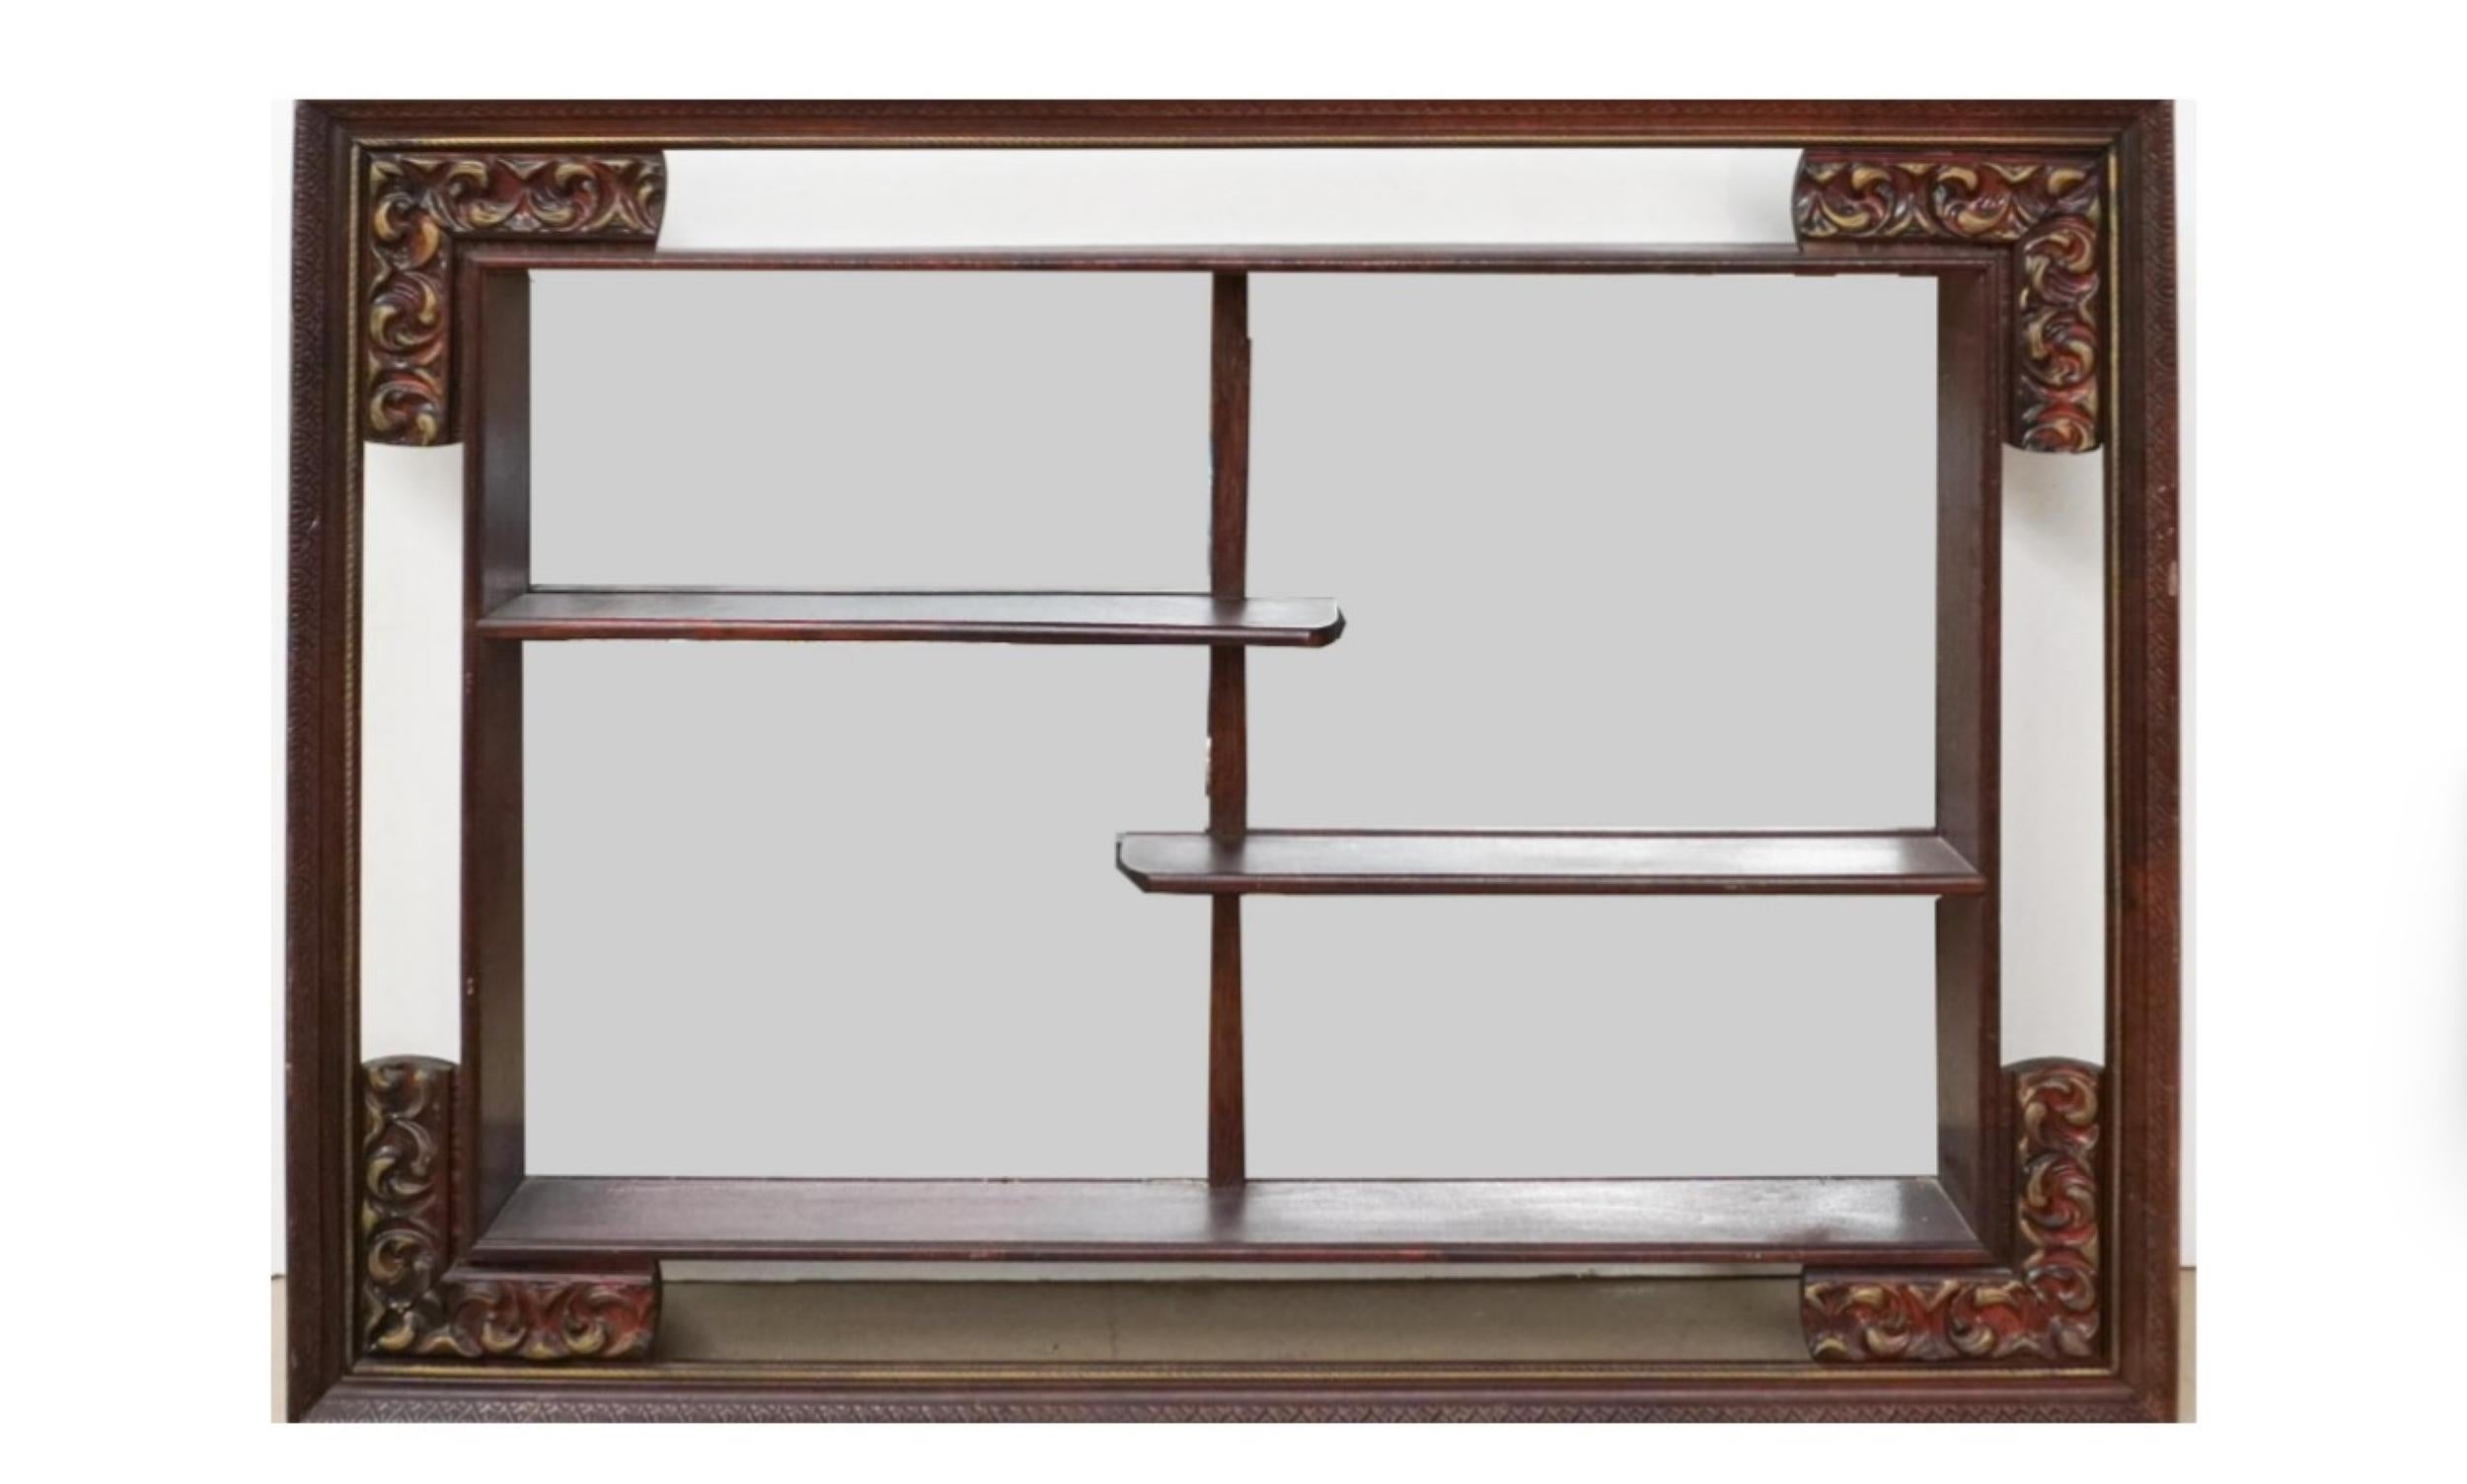 A rare Chinese Carved and Lacquered Wood Framed Mirrored-Back Etagere. Measures 37.25